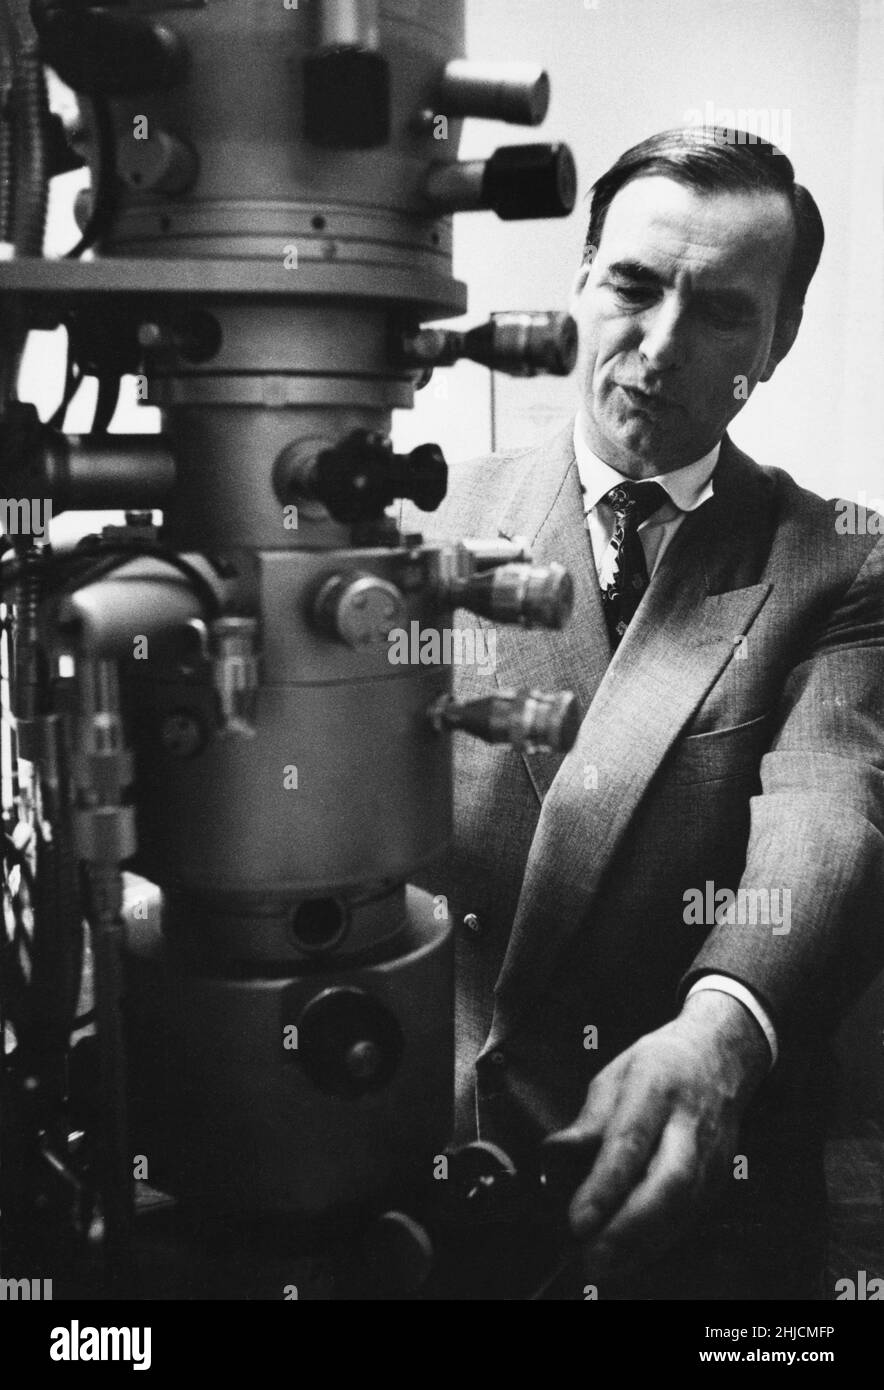 Professor Ernst Ruska (1906-1988) was a German physicist who built an electron lens, which he used in constructing the first electron microscope. Photographed here at the Max Plank Institute for Physics in Berlin. Stock Photo